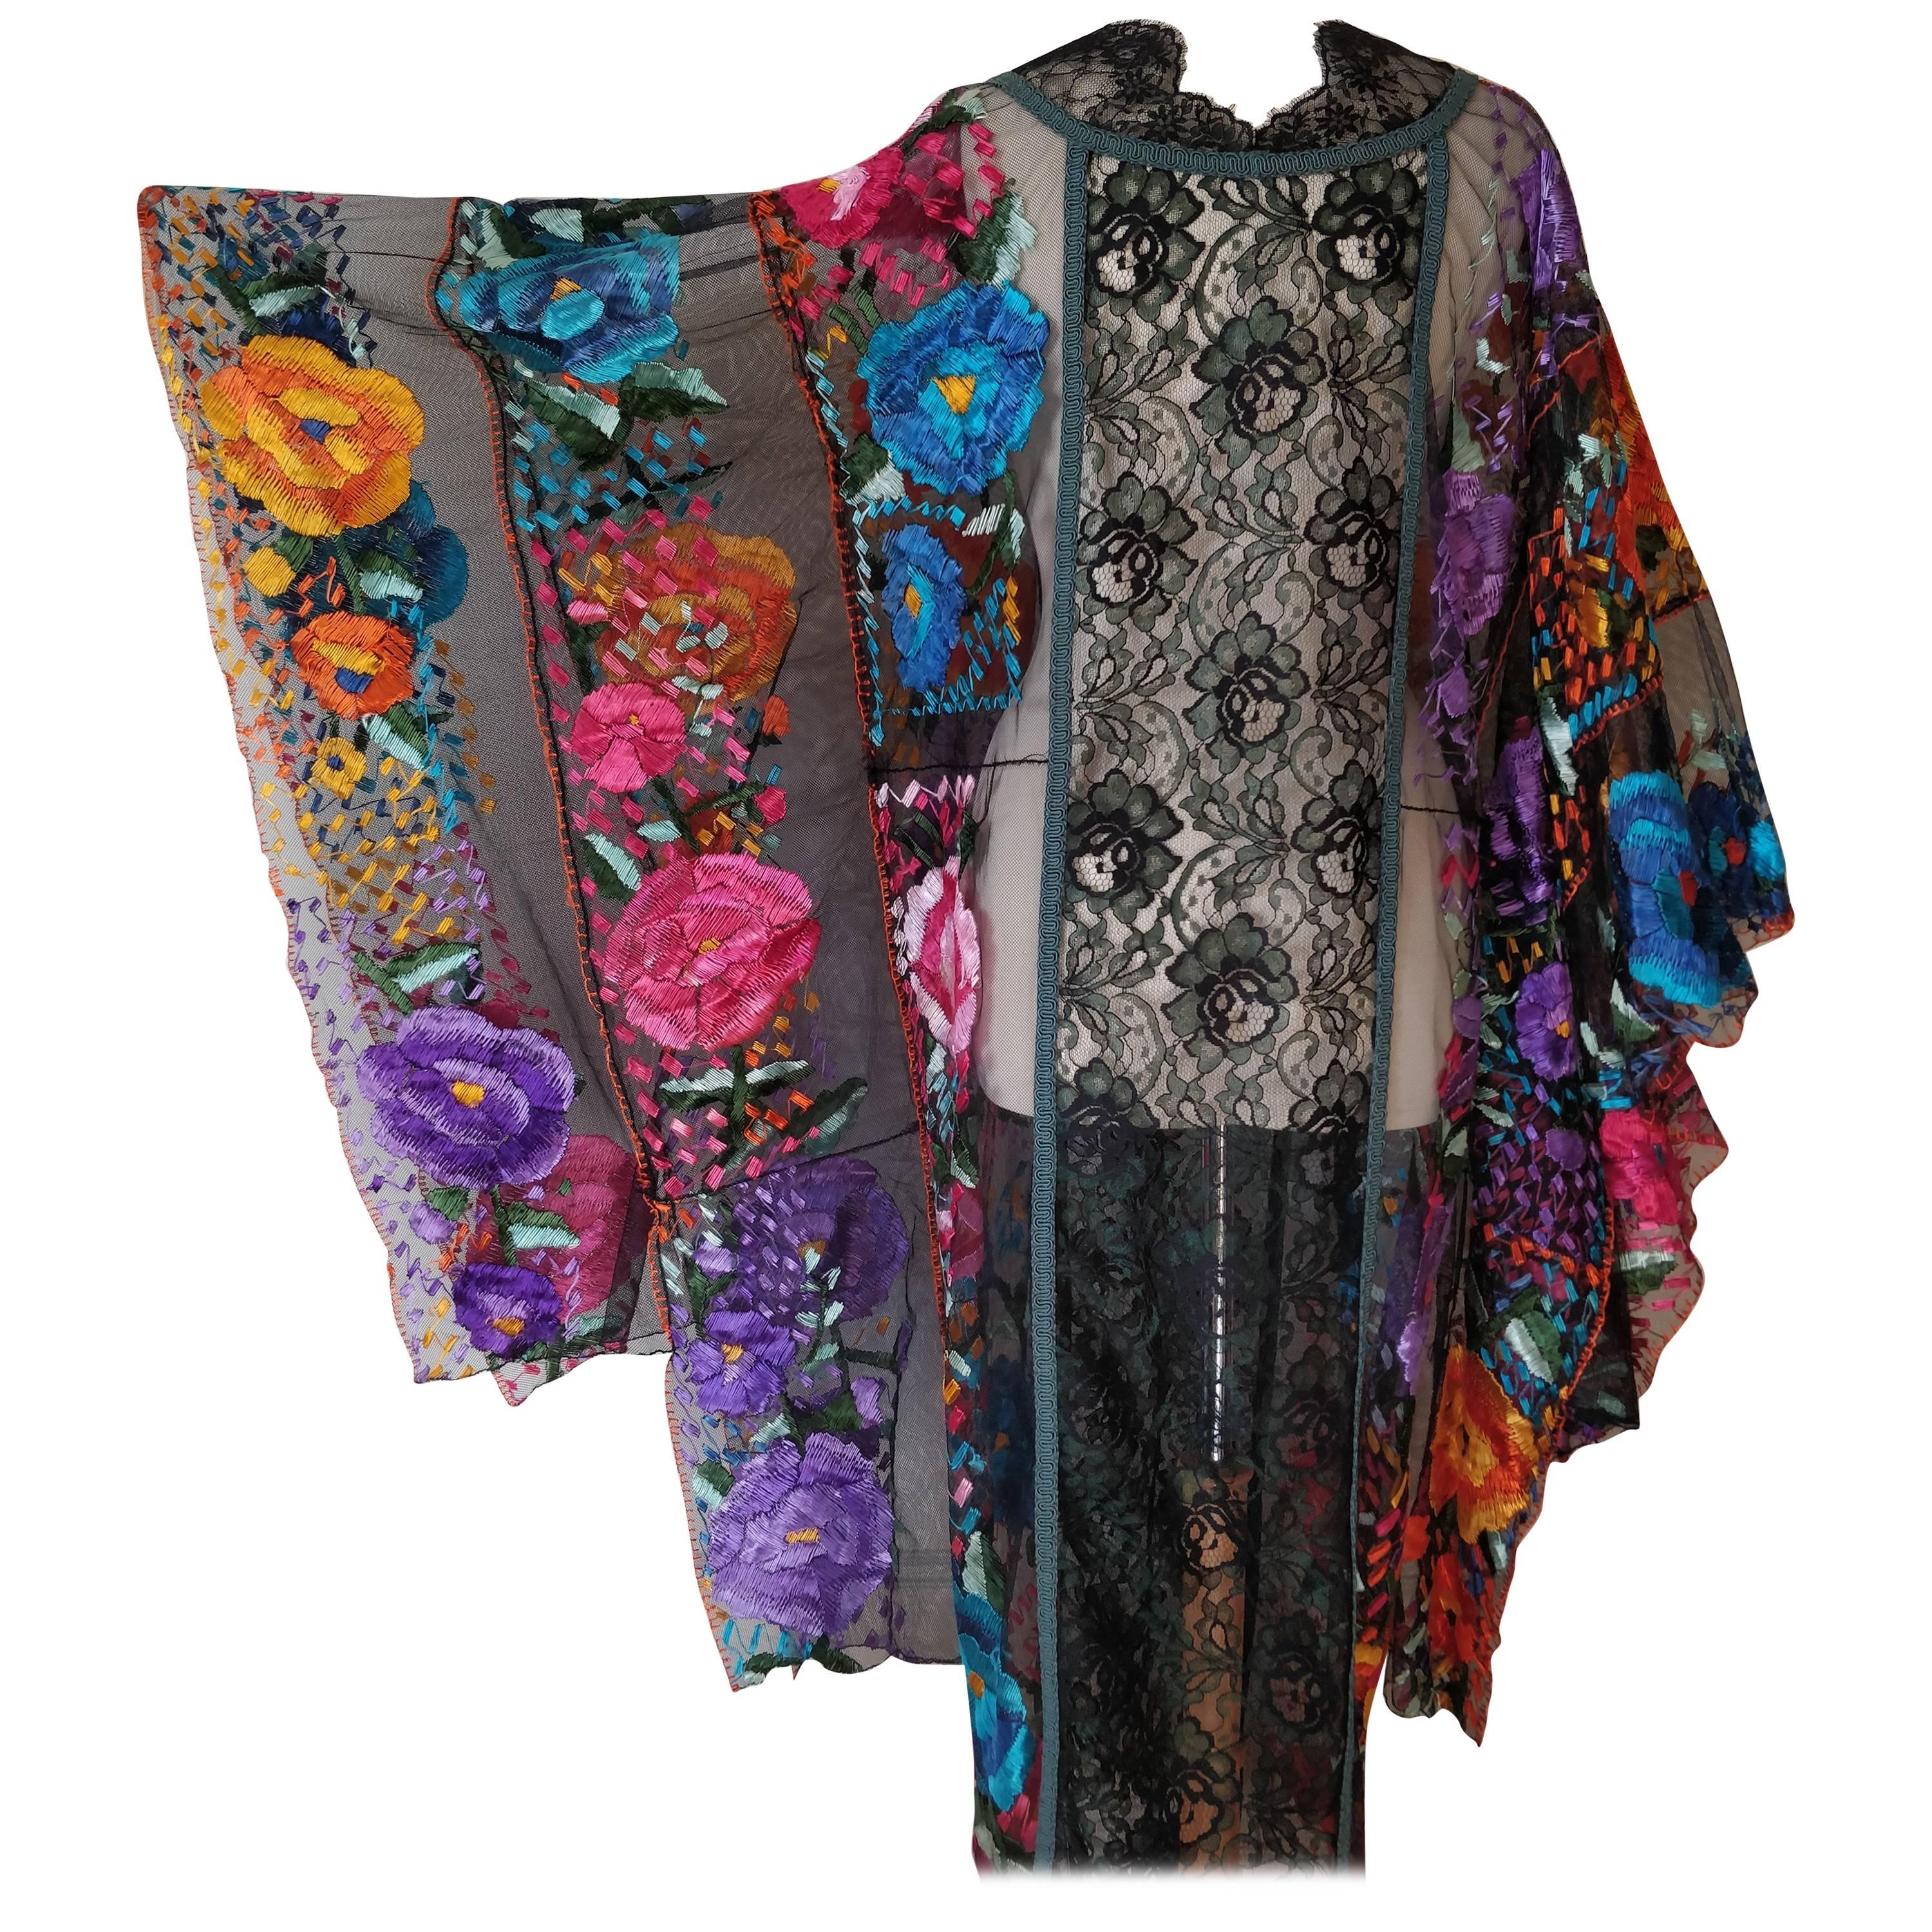 1950s Caftan with Traditional Mexican Embroidery Panels and Mixed Lace